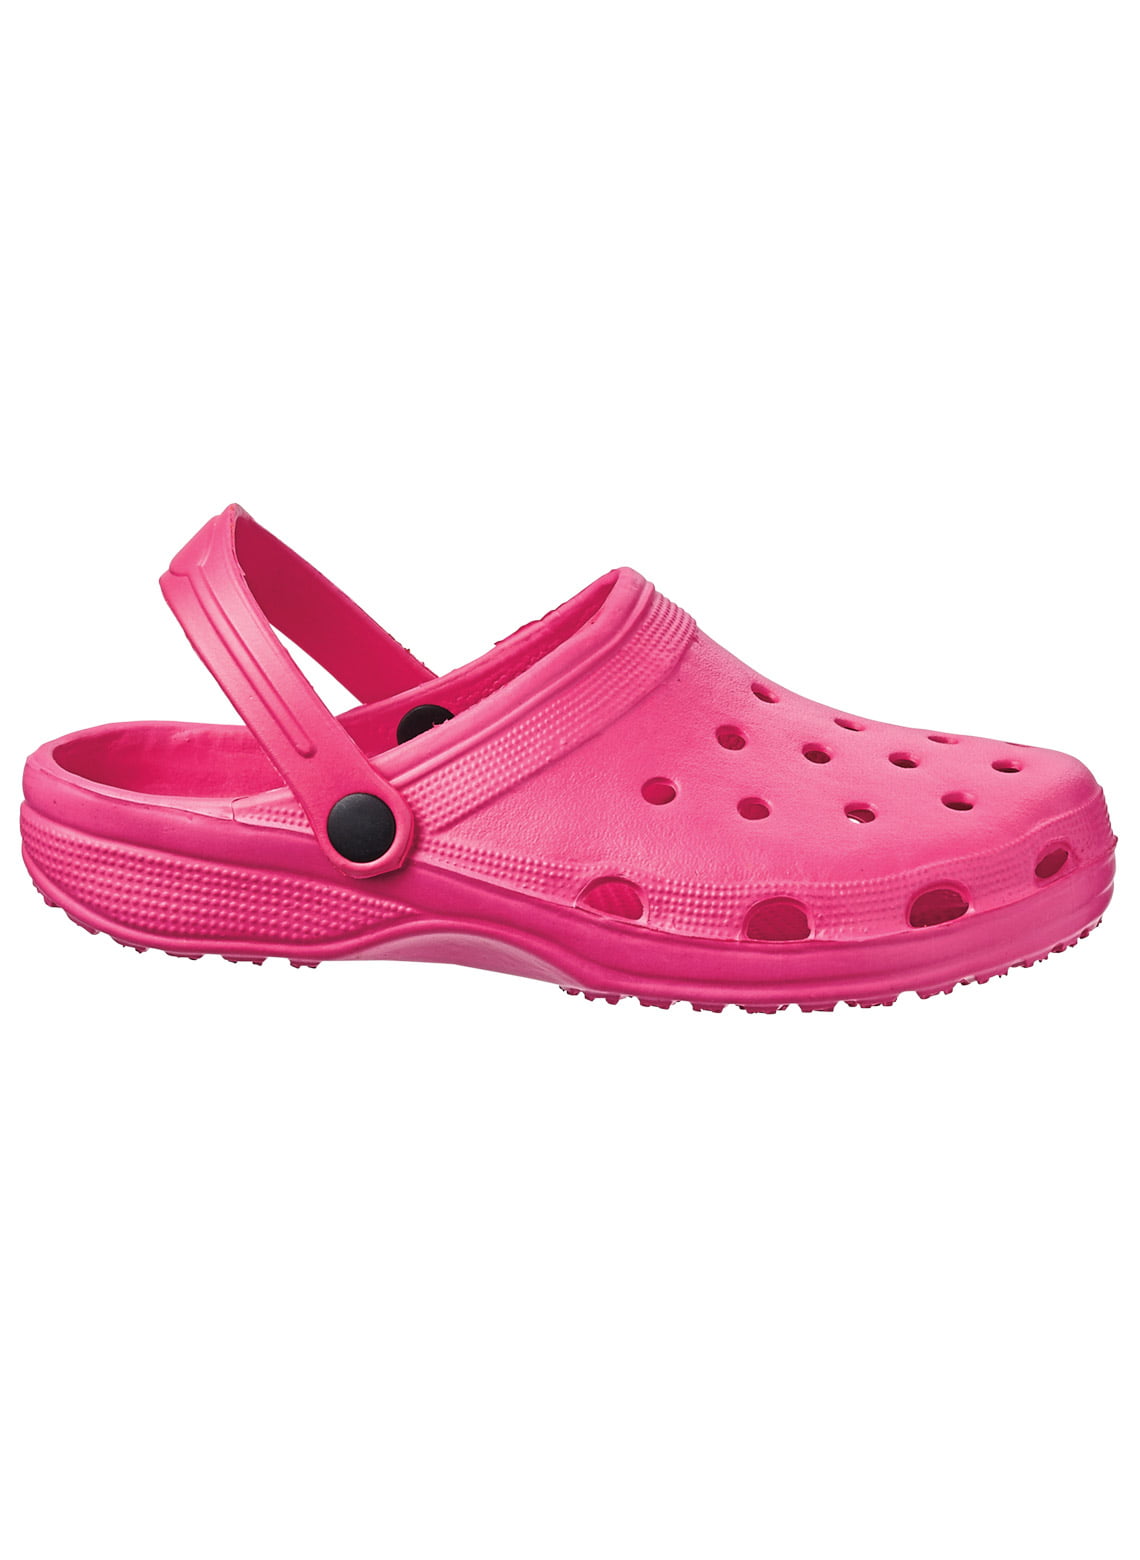 Candy Pink/Peony crocs Kids Classic Lined Graphic Clog-K 12 M US Little Kid 